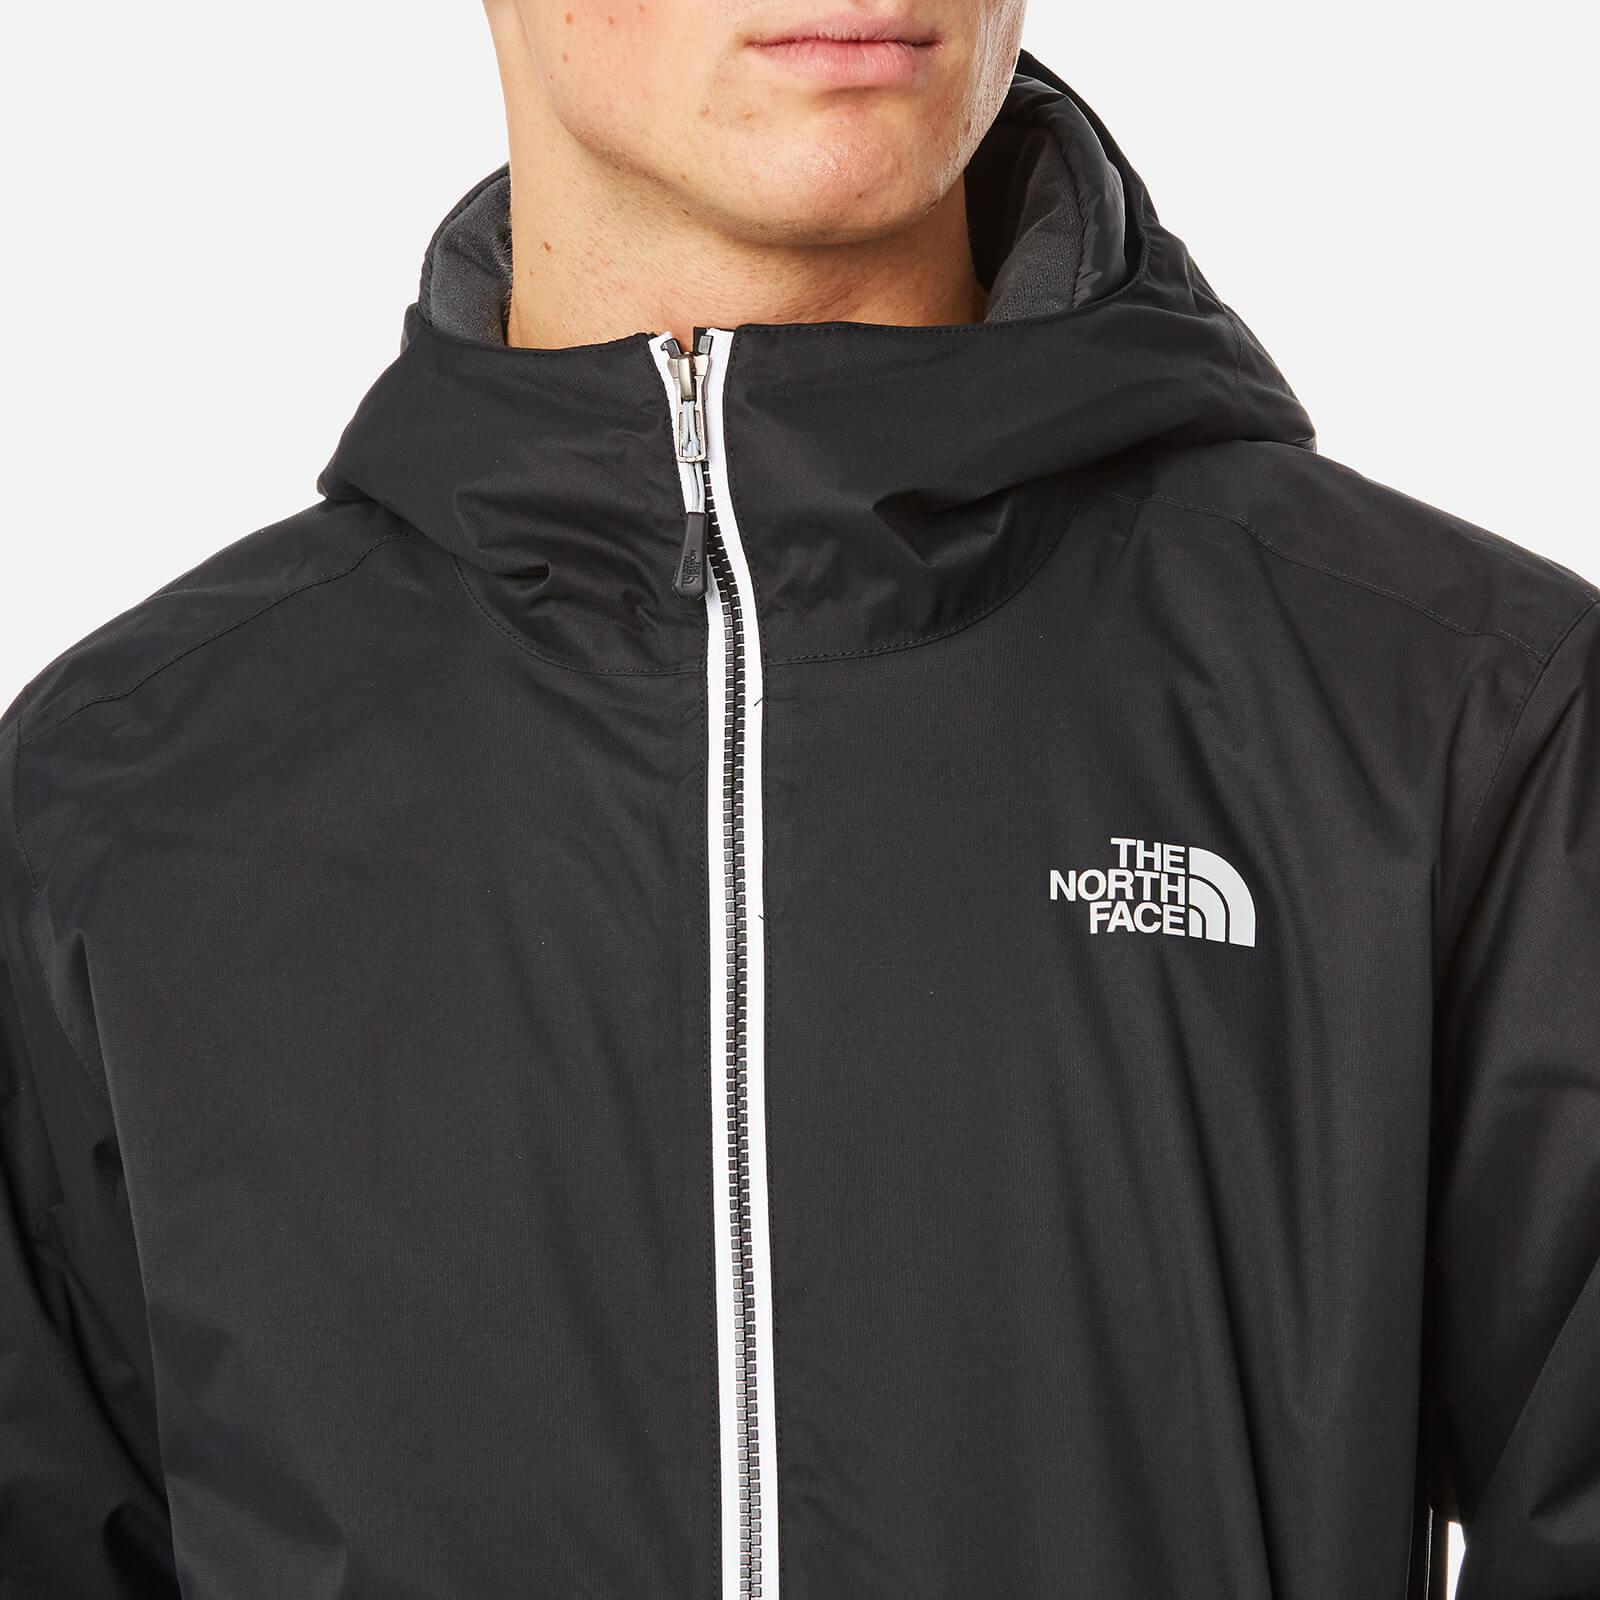 The North Face Synthetic Quest Insulated Jacket in Black for Men - Lyst